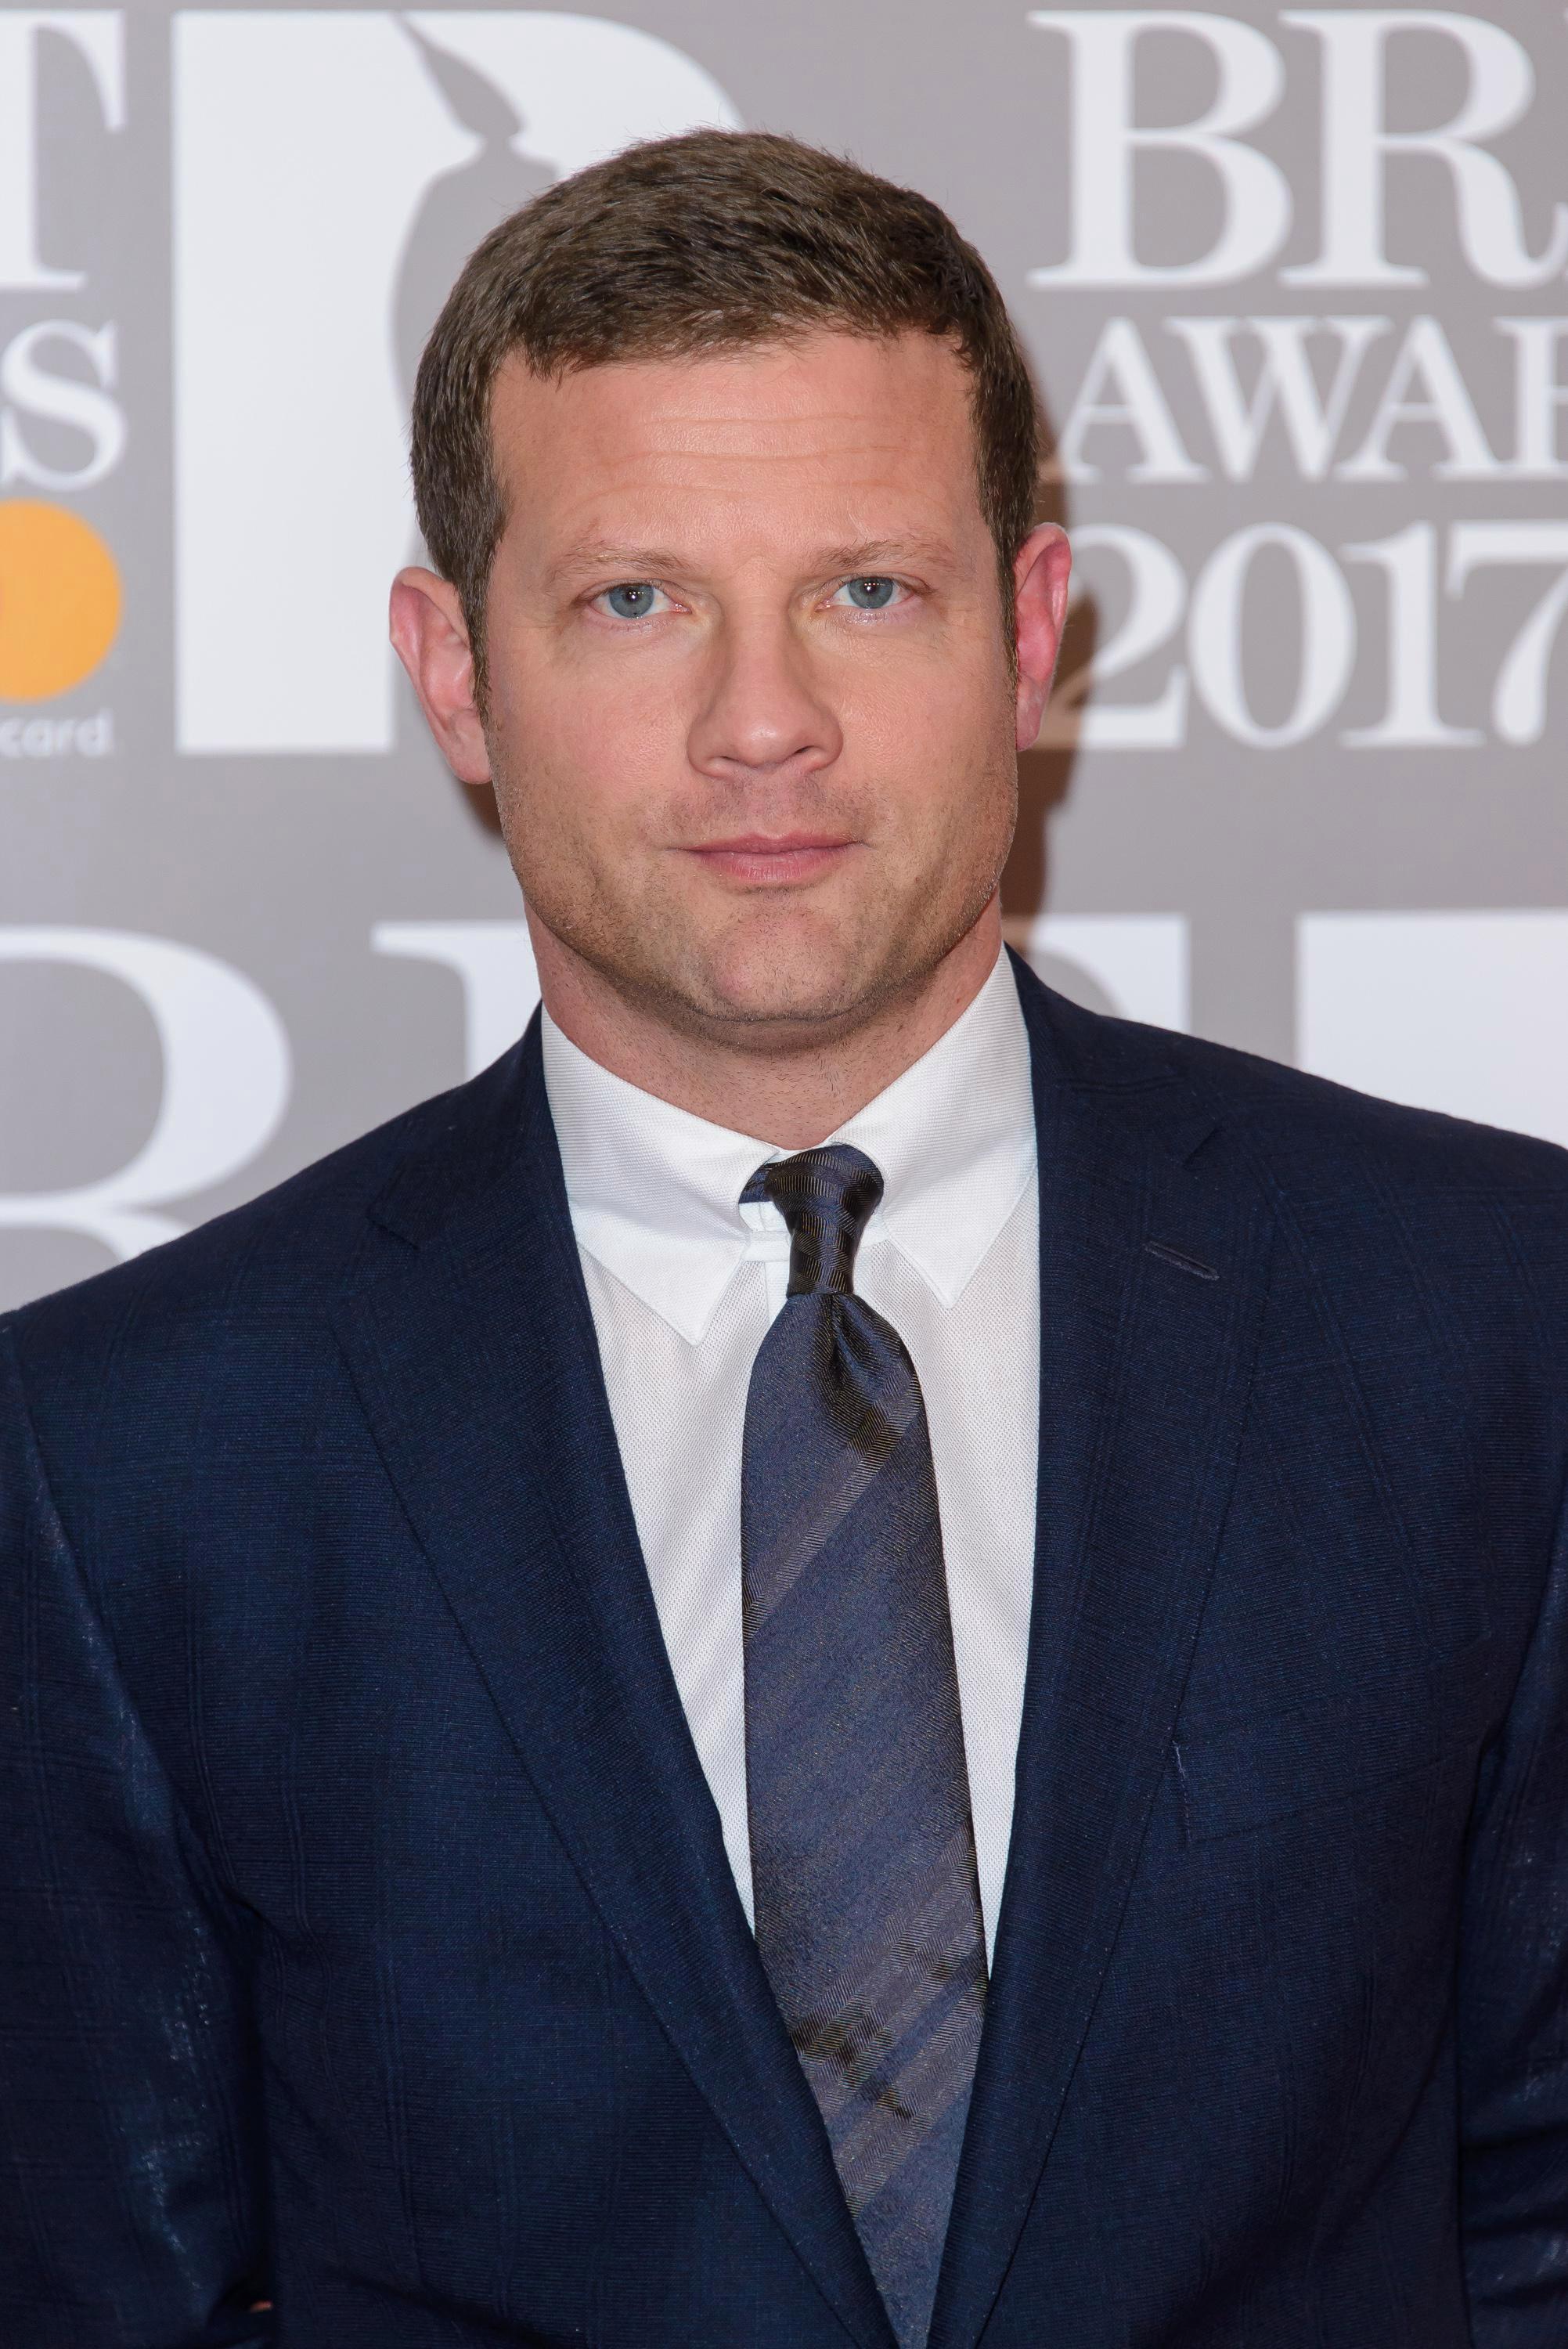 How tall is Dermot O'Leary?